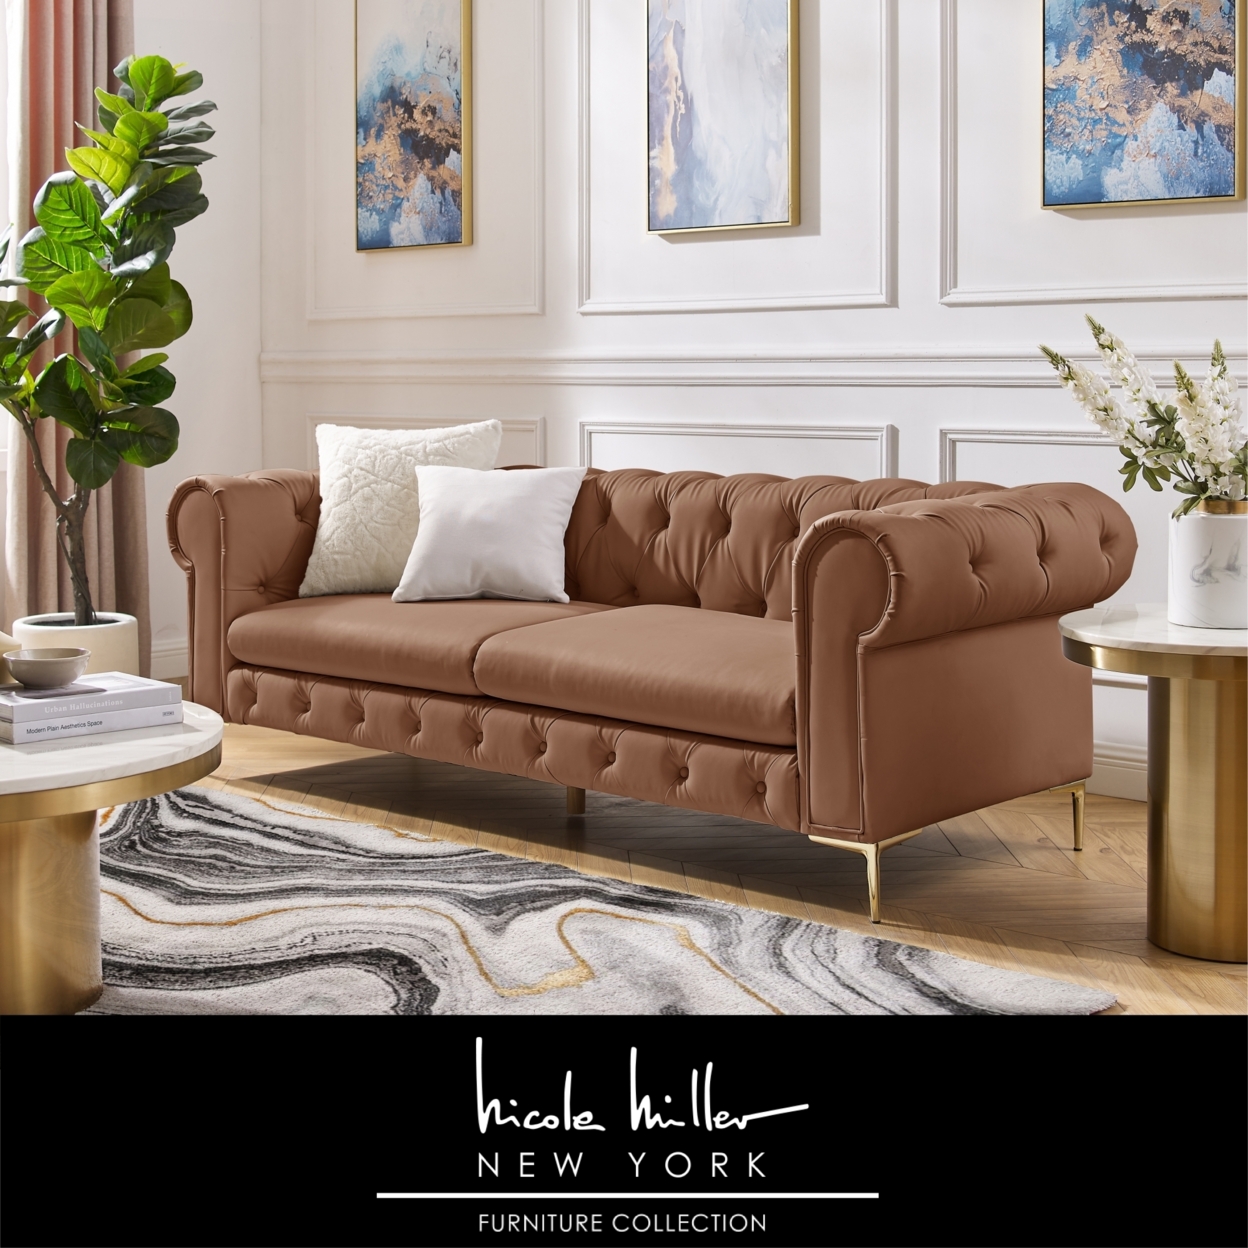 Laci Sofa - Button Tufted, 3 Seat - Rolled Arms - Y Leg, Sinuous Springs - Camel